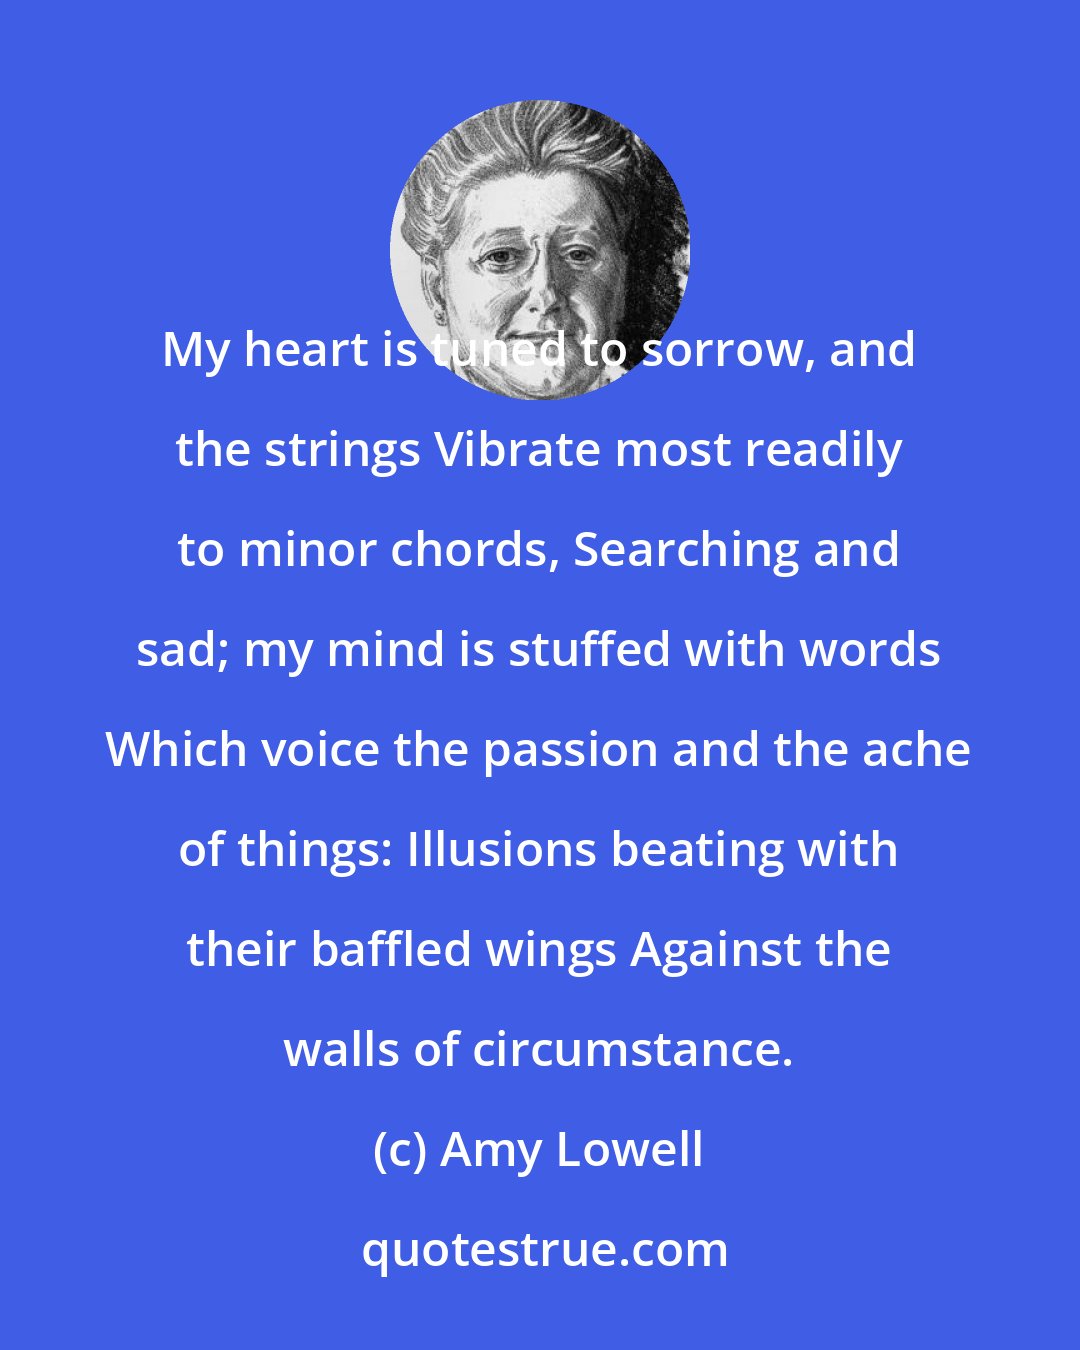 Amy Lowell: My heart is tuned to sorrow, and the strings Vibrate most readily to minor chords, Searching and sad; my mind is stuffed with words Which voice the passion and the ache of things: Illusions beating with their baffled wings Against the walls of circumstance.